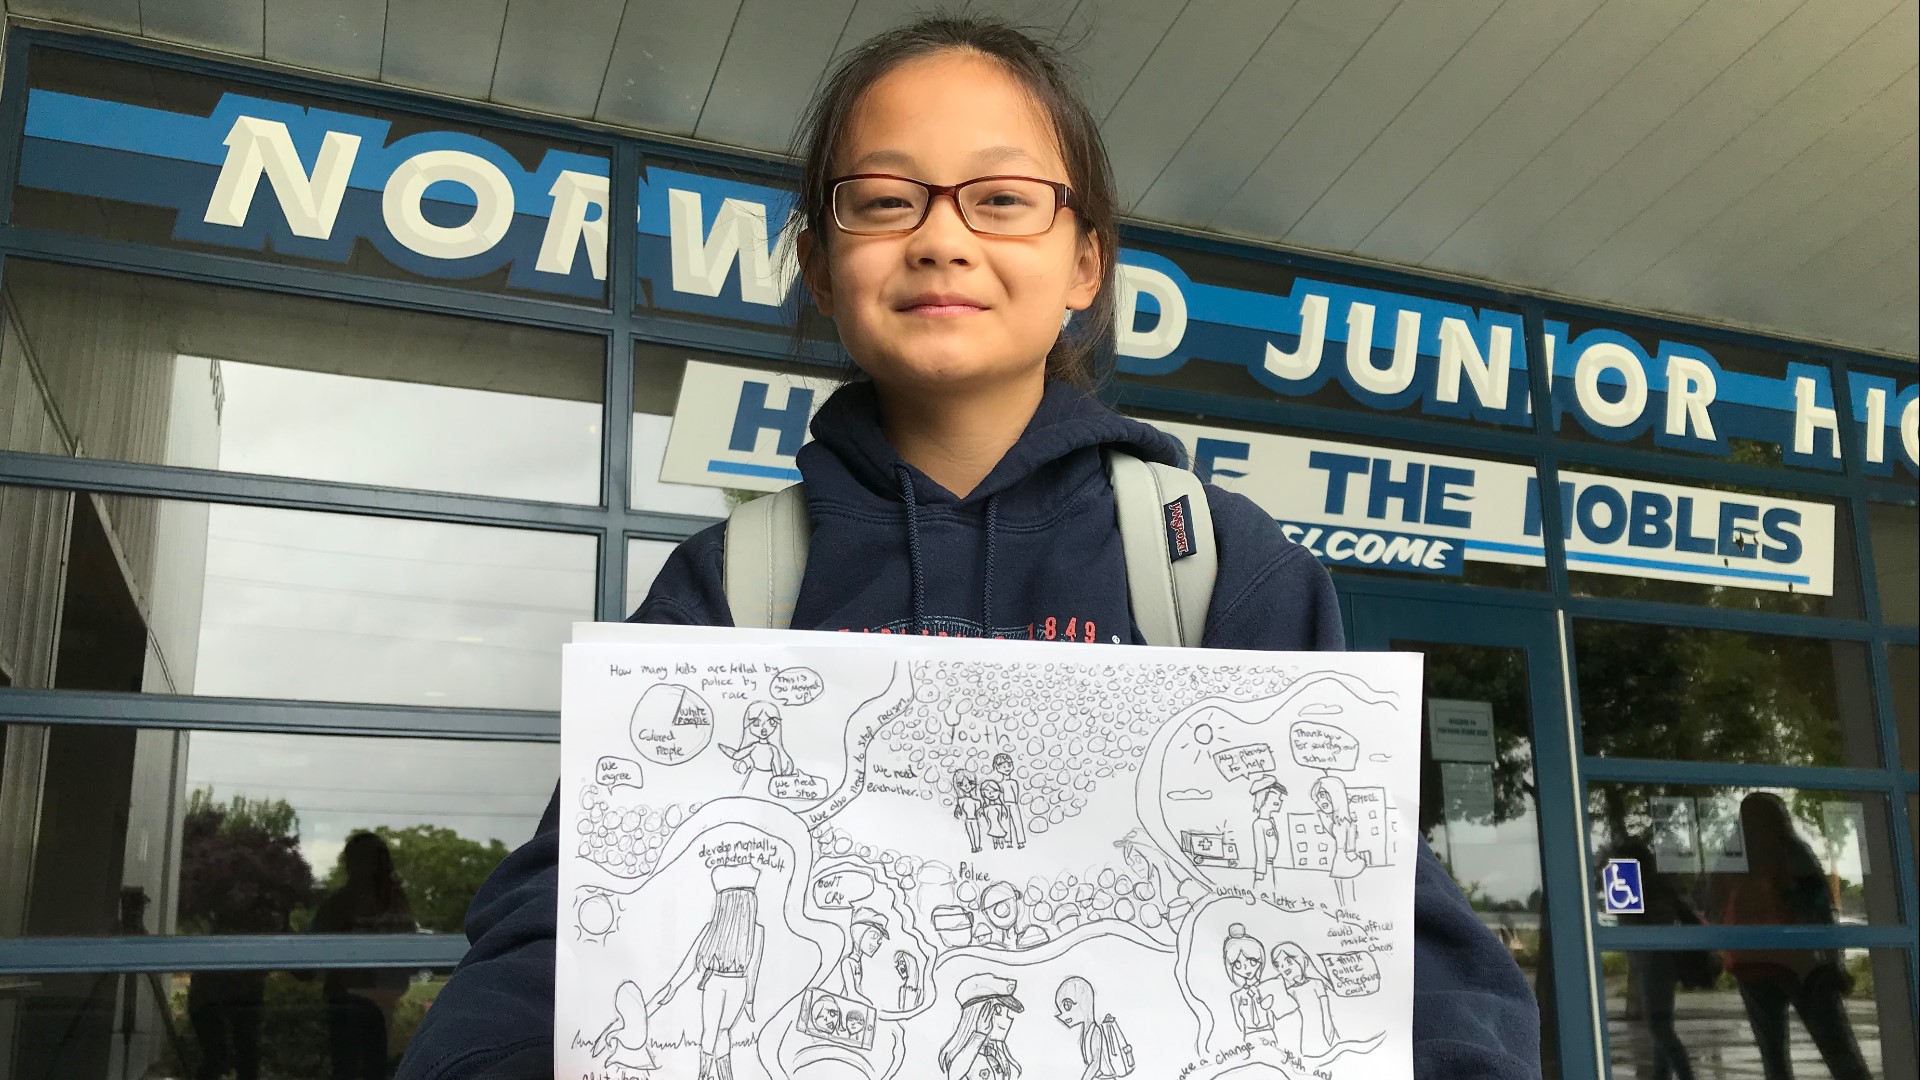 Evelina Cheng, 12, says entered the "Youth Voices" national contest knowing exactly what she wanted to draw.